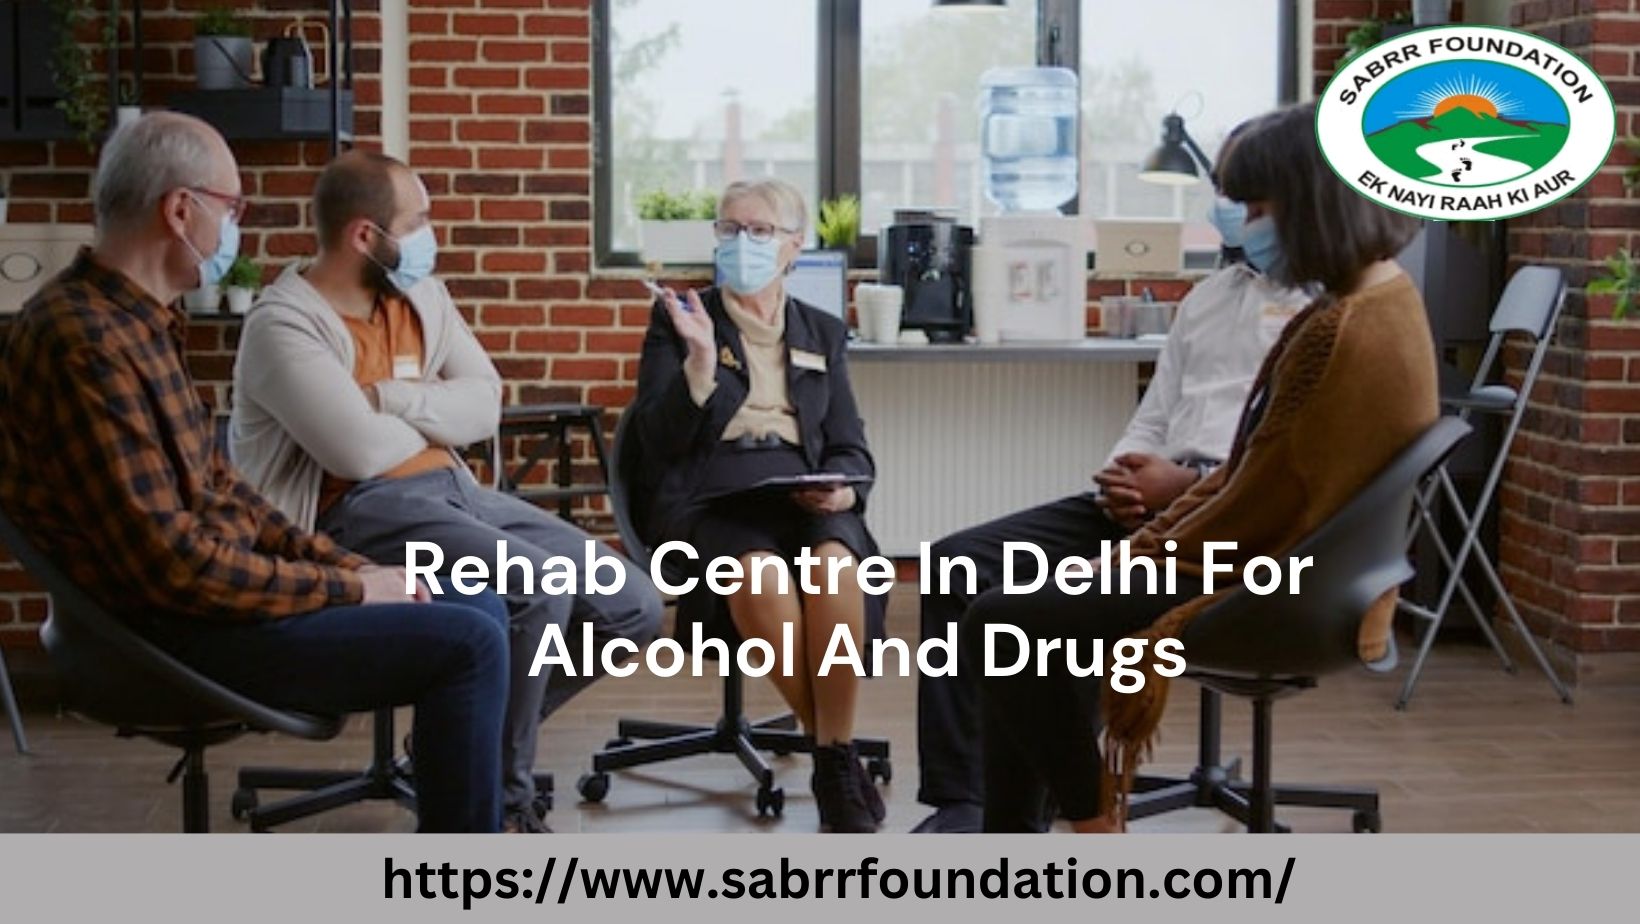 Rehab Centre In Delhi For Alcohol And Drugs